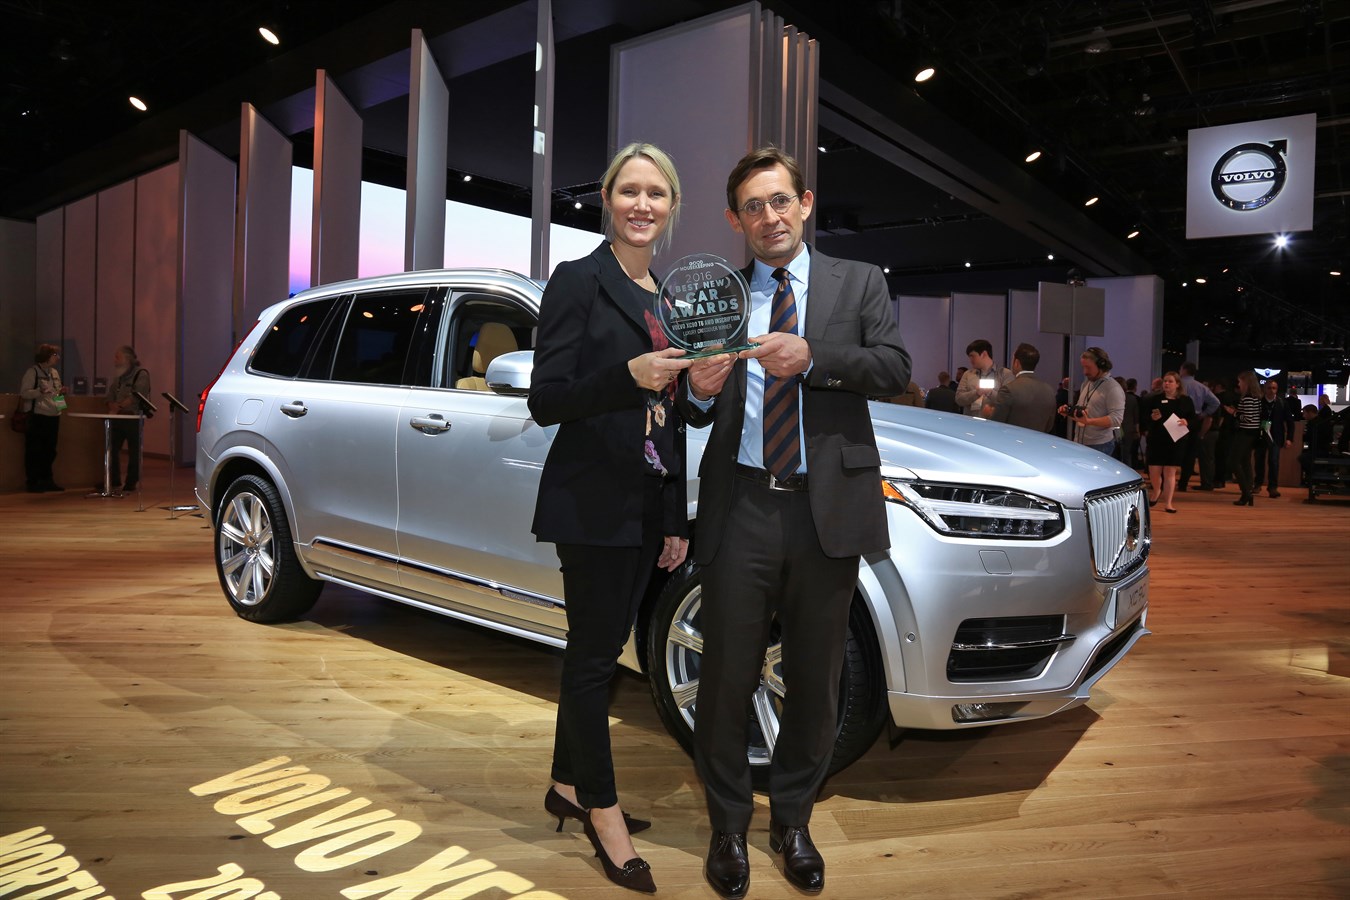 Volvo XC90 North  American Truck of The Year - Lex Kerssemakers Président & CEO Volvo Car USA Photo @ ACE TEAM